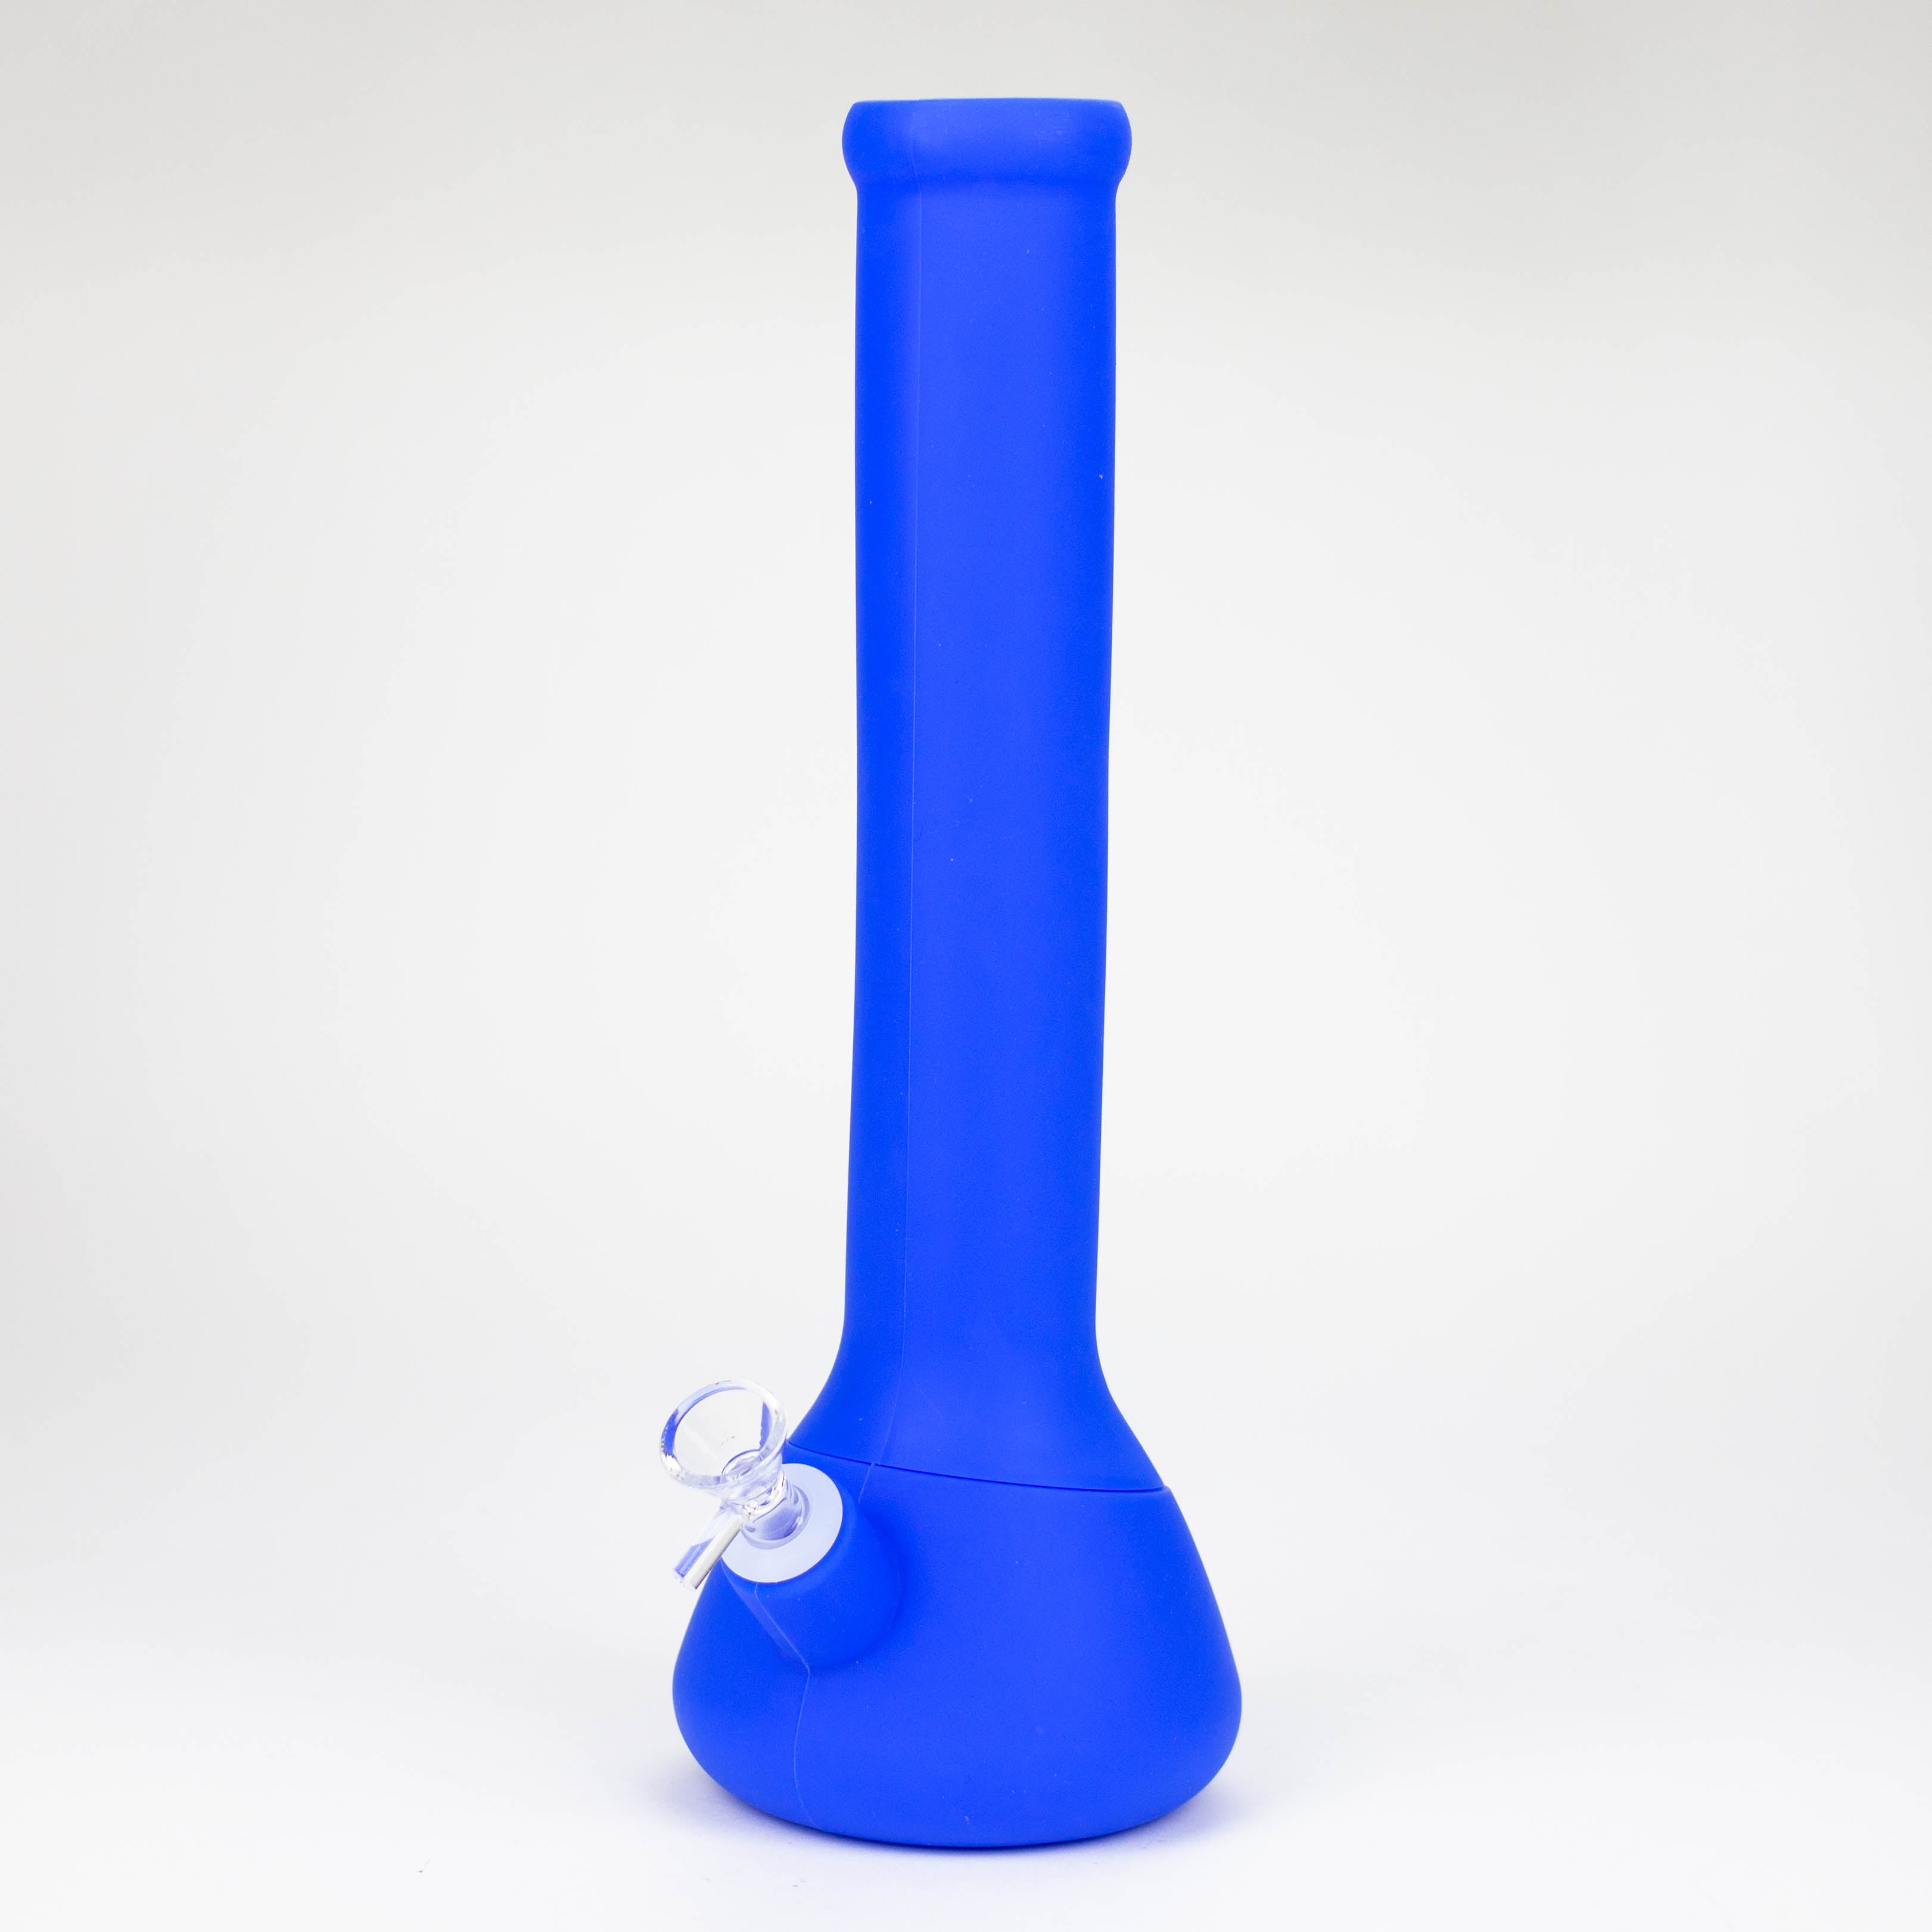 13.5" detachable silicone water bong - Assorted [H5]_1